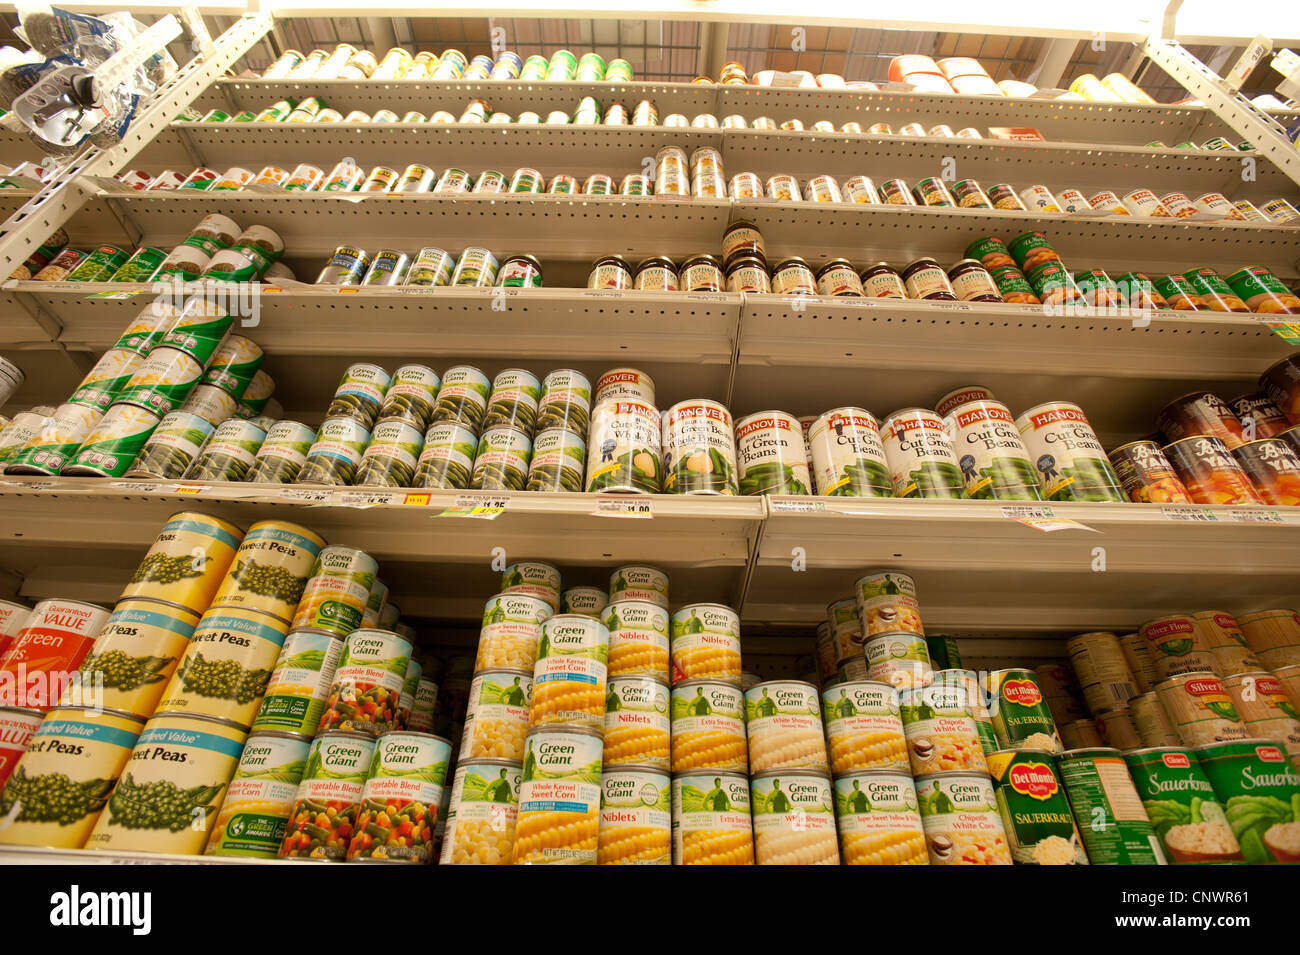 Canned foods isle in the grocery store Stock Photo